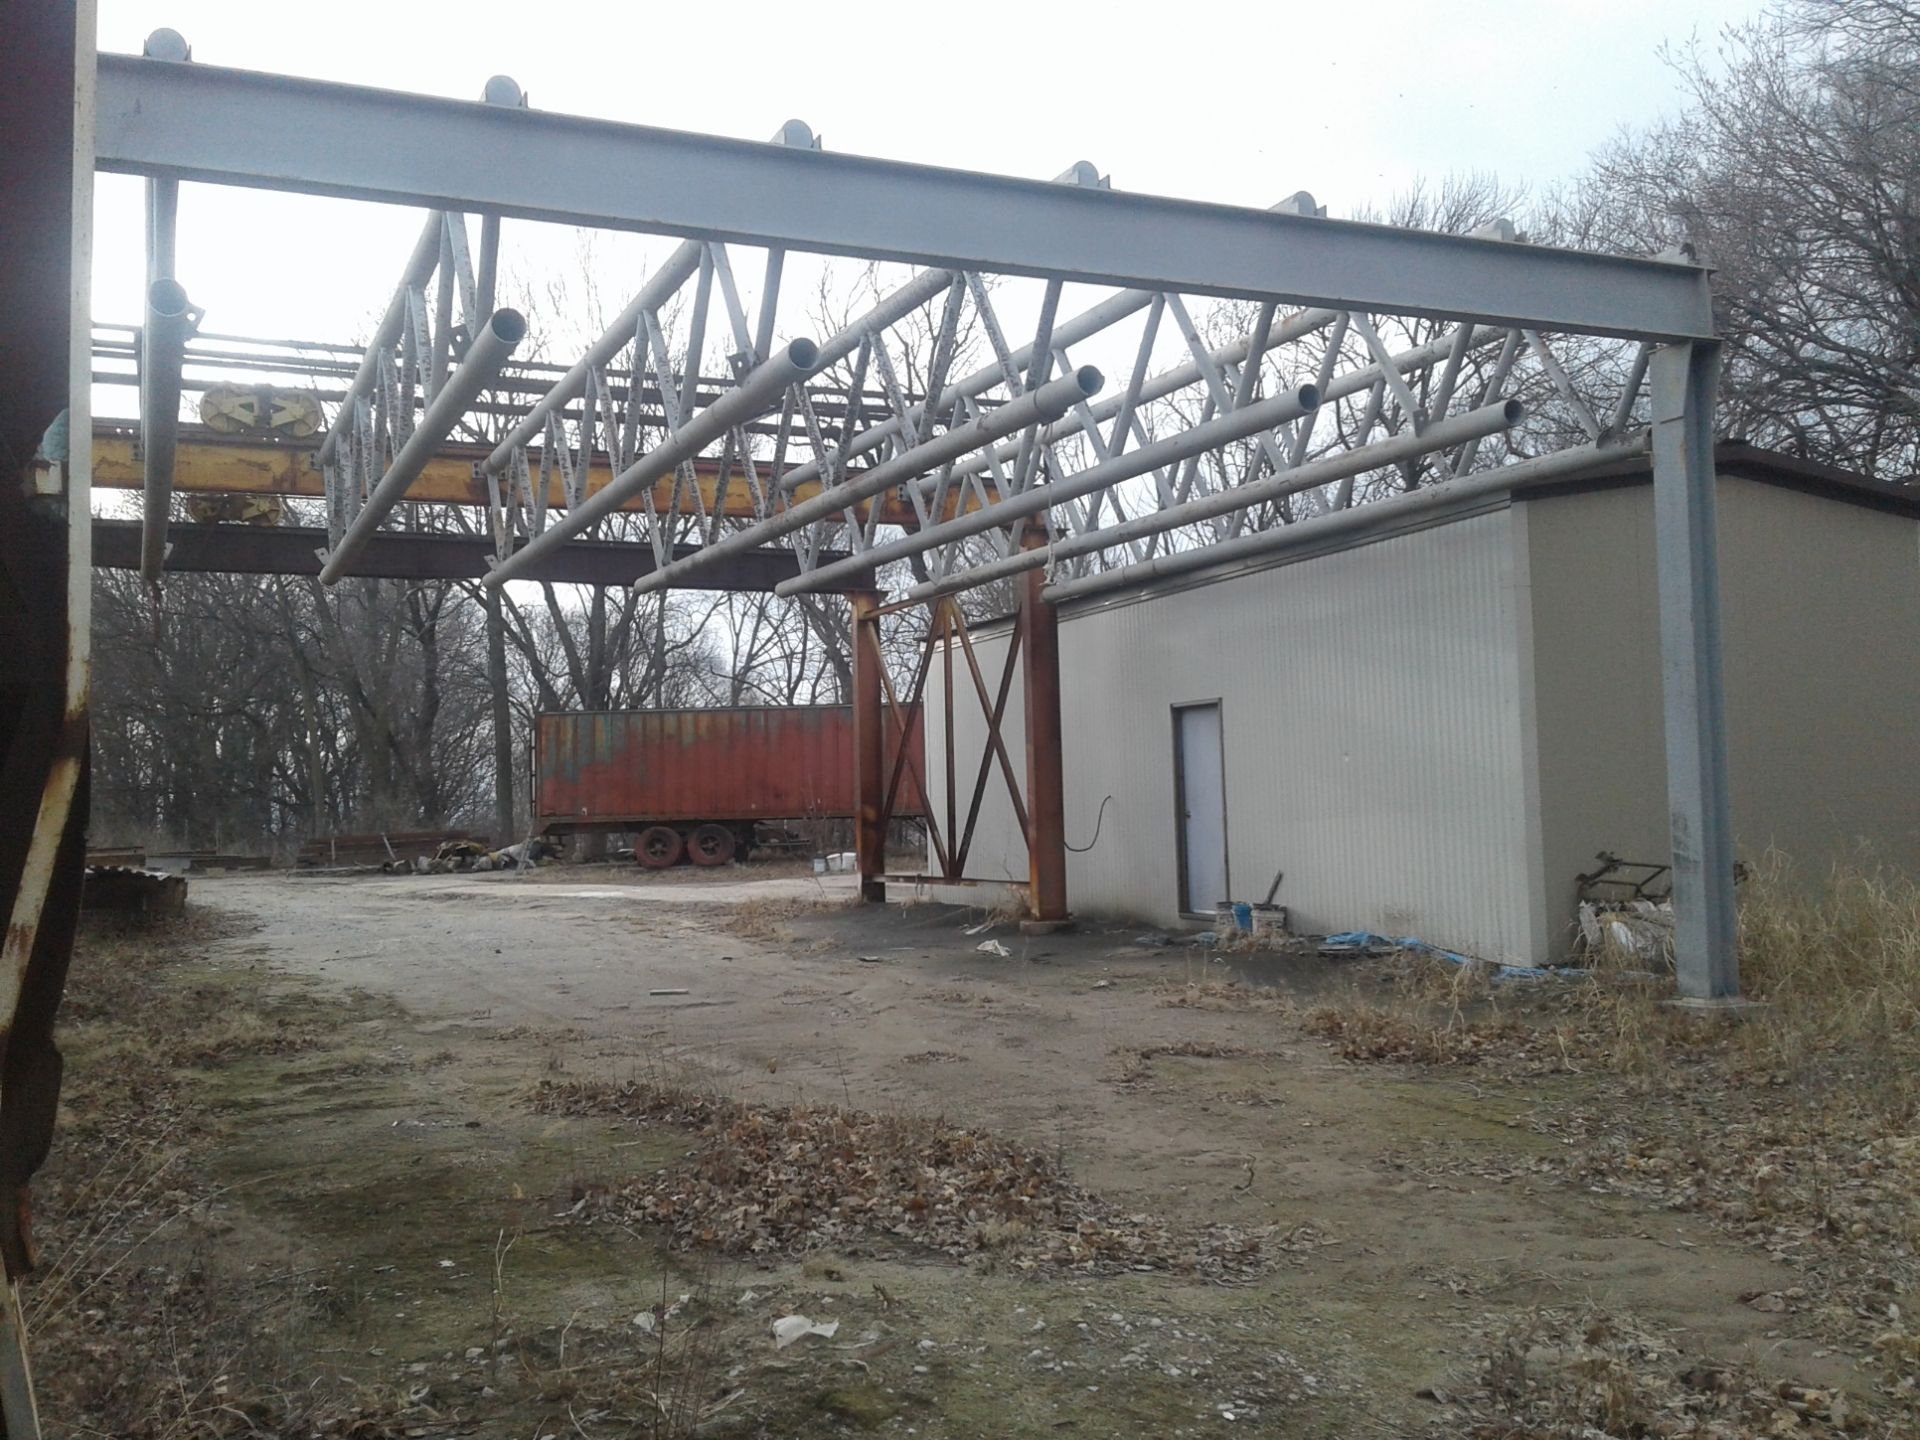 OUTDOOR FREE STANDING CRANE, APPROX 40' X 20', WITH OVERHEAD STEEL TROLLY - Image 7 of 8